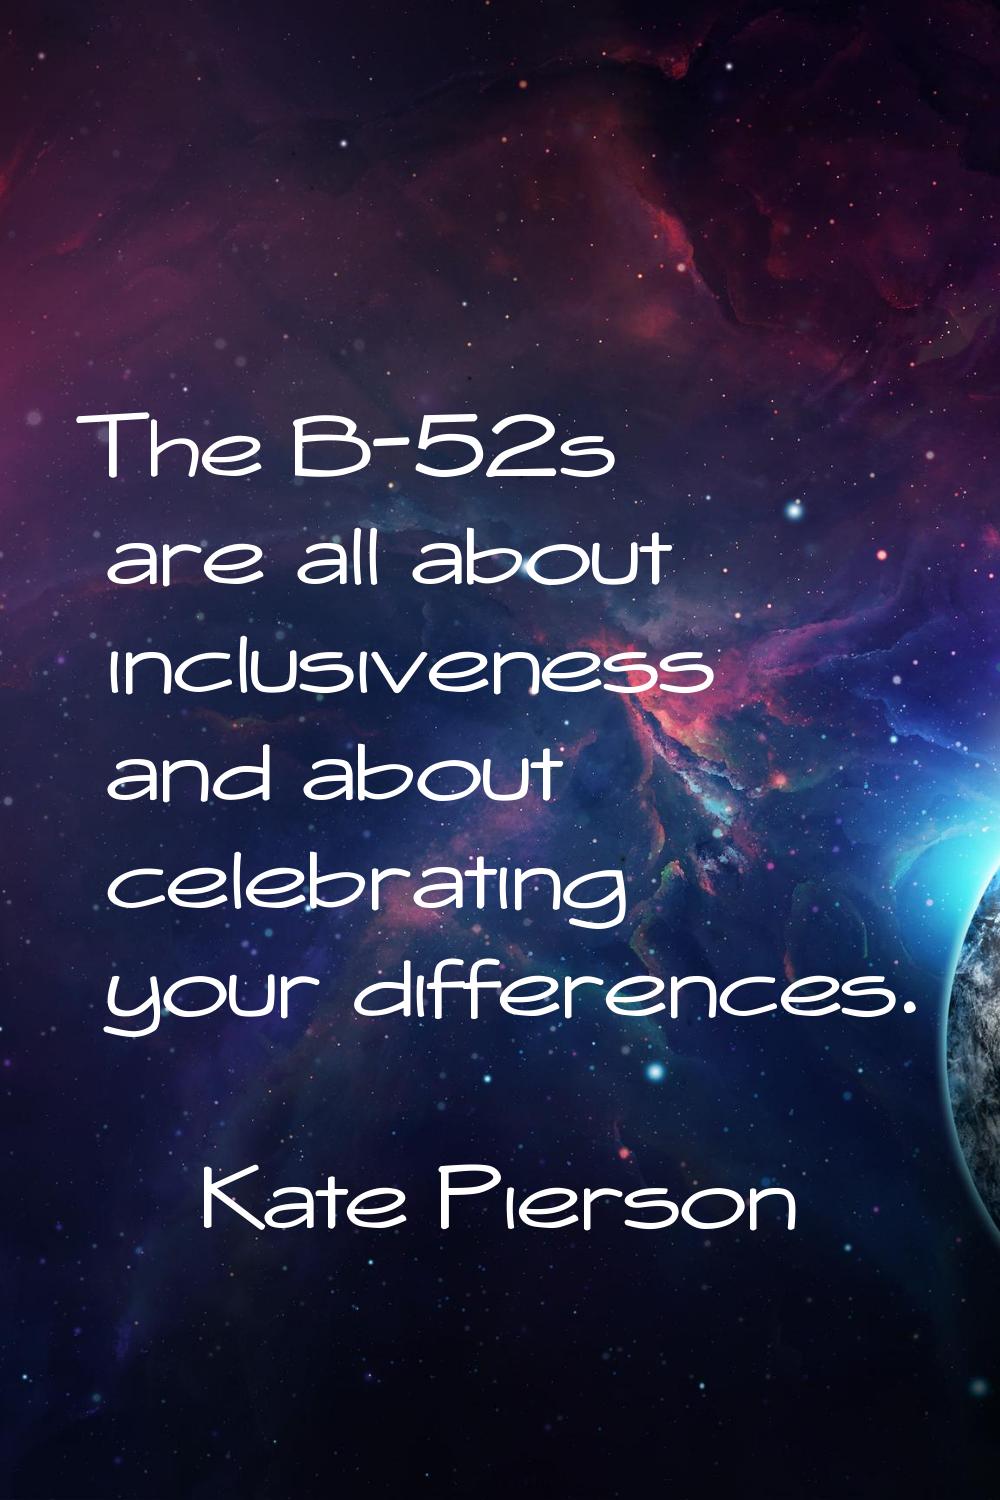 The B-52s are all about inclusiveness and about celebrating your differences.